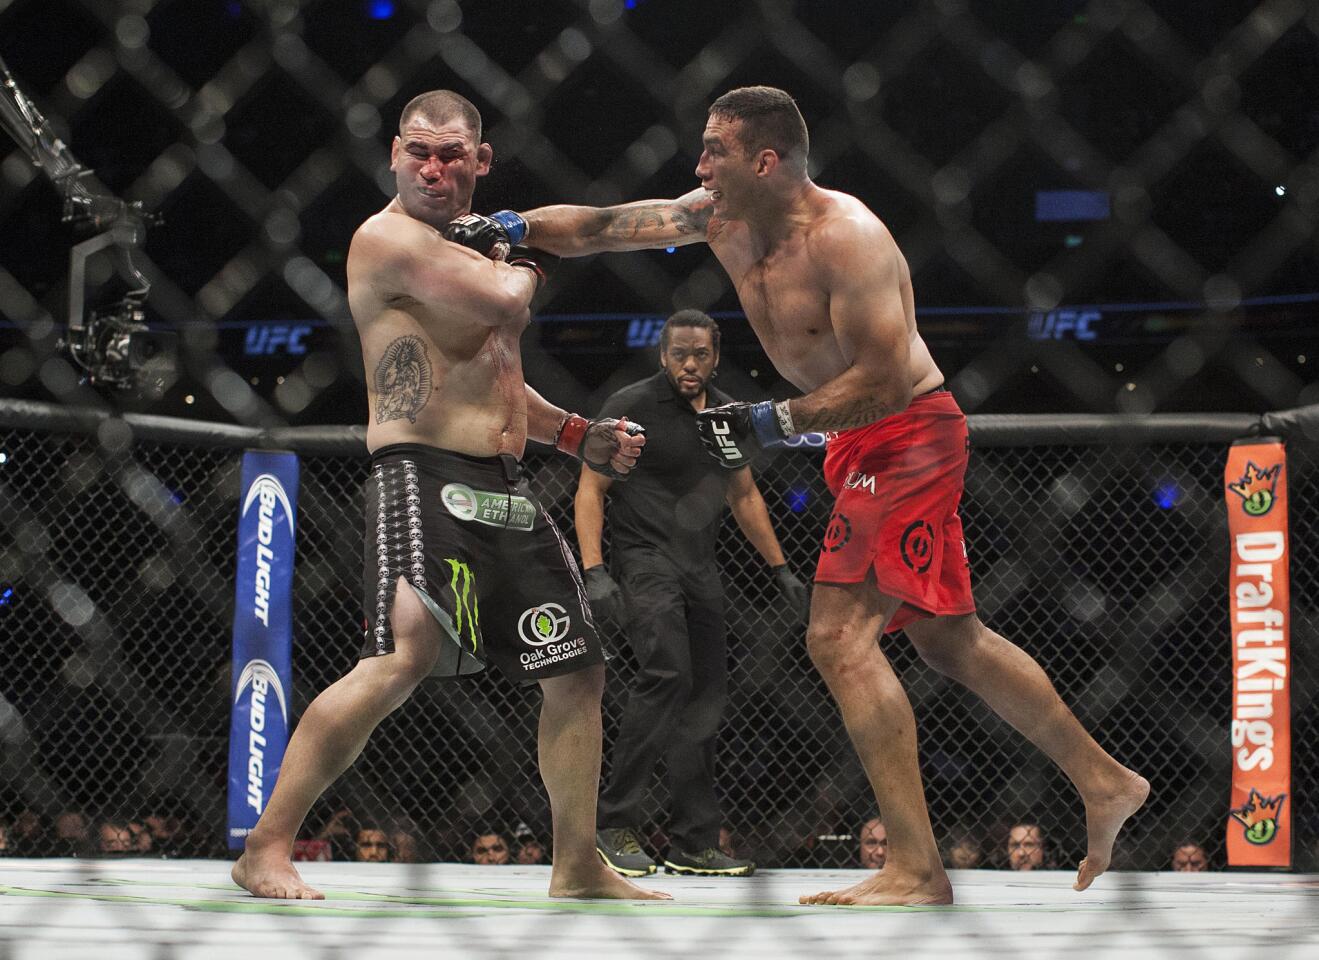 Fabricio Werdum lands a punch to Cain Velasquez during their UFC 188 bout Saturday night in Mexico City.